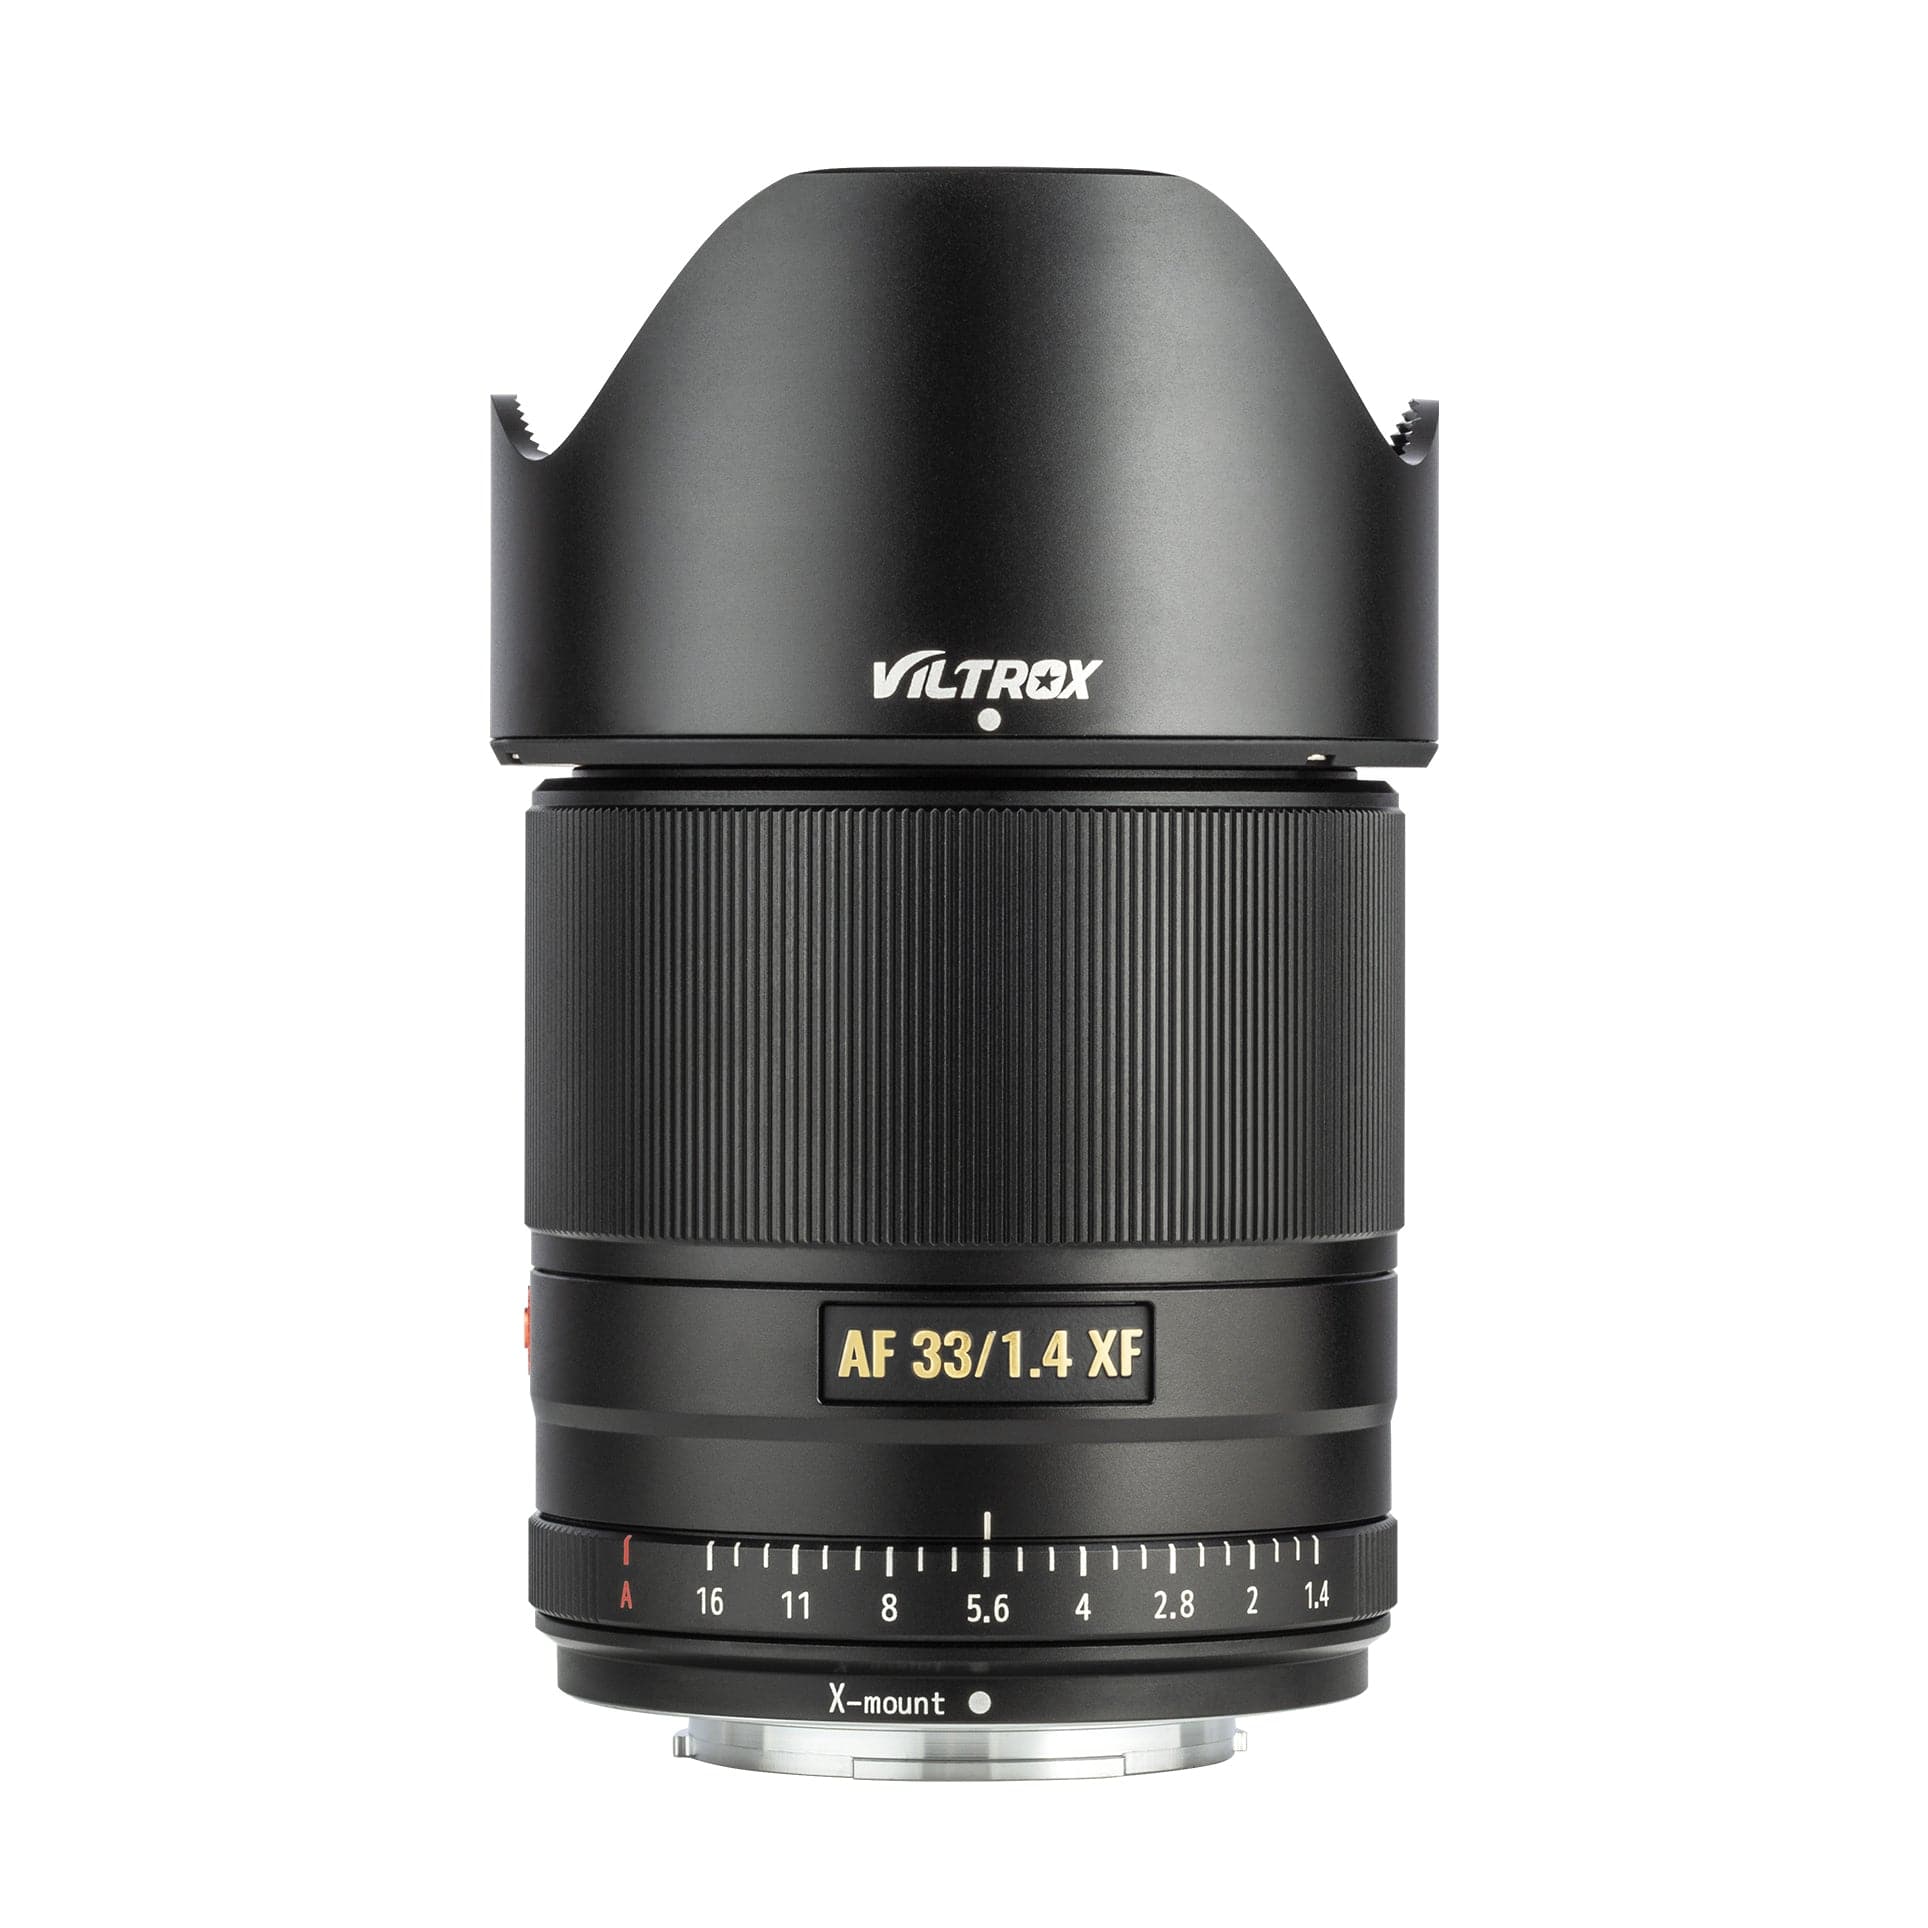 VILTROX 13mm F1.4 XF Auto Focus Ultra Wide Angle Lens Support Eye AF F